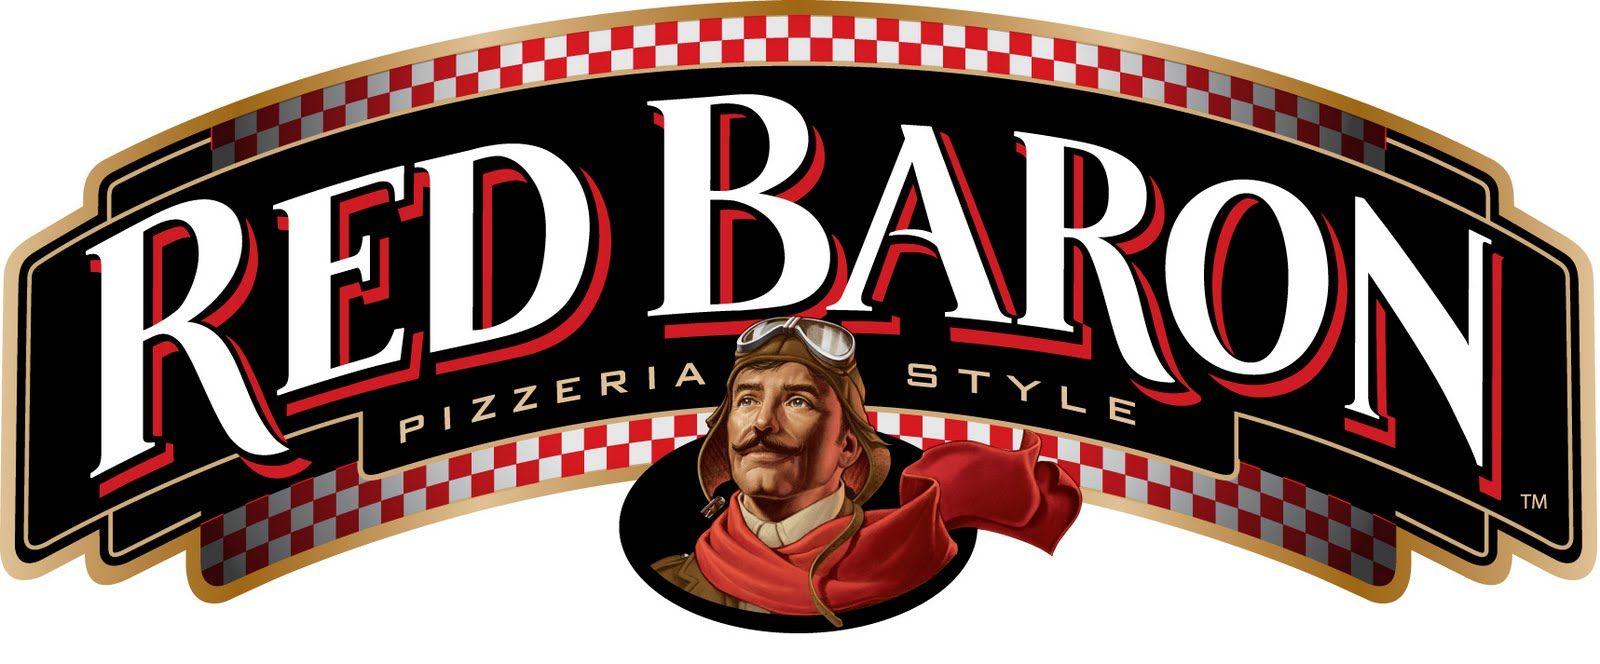 Red Baron Logo - Red Baron Pizza, Less Than $2 Each! - Coupon Connections